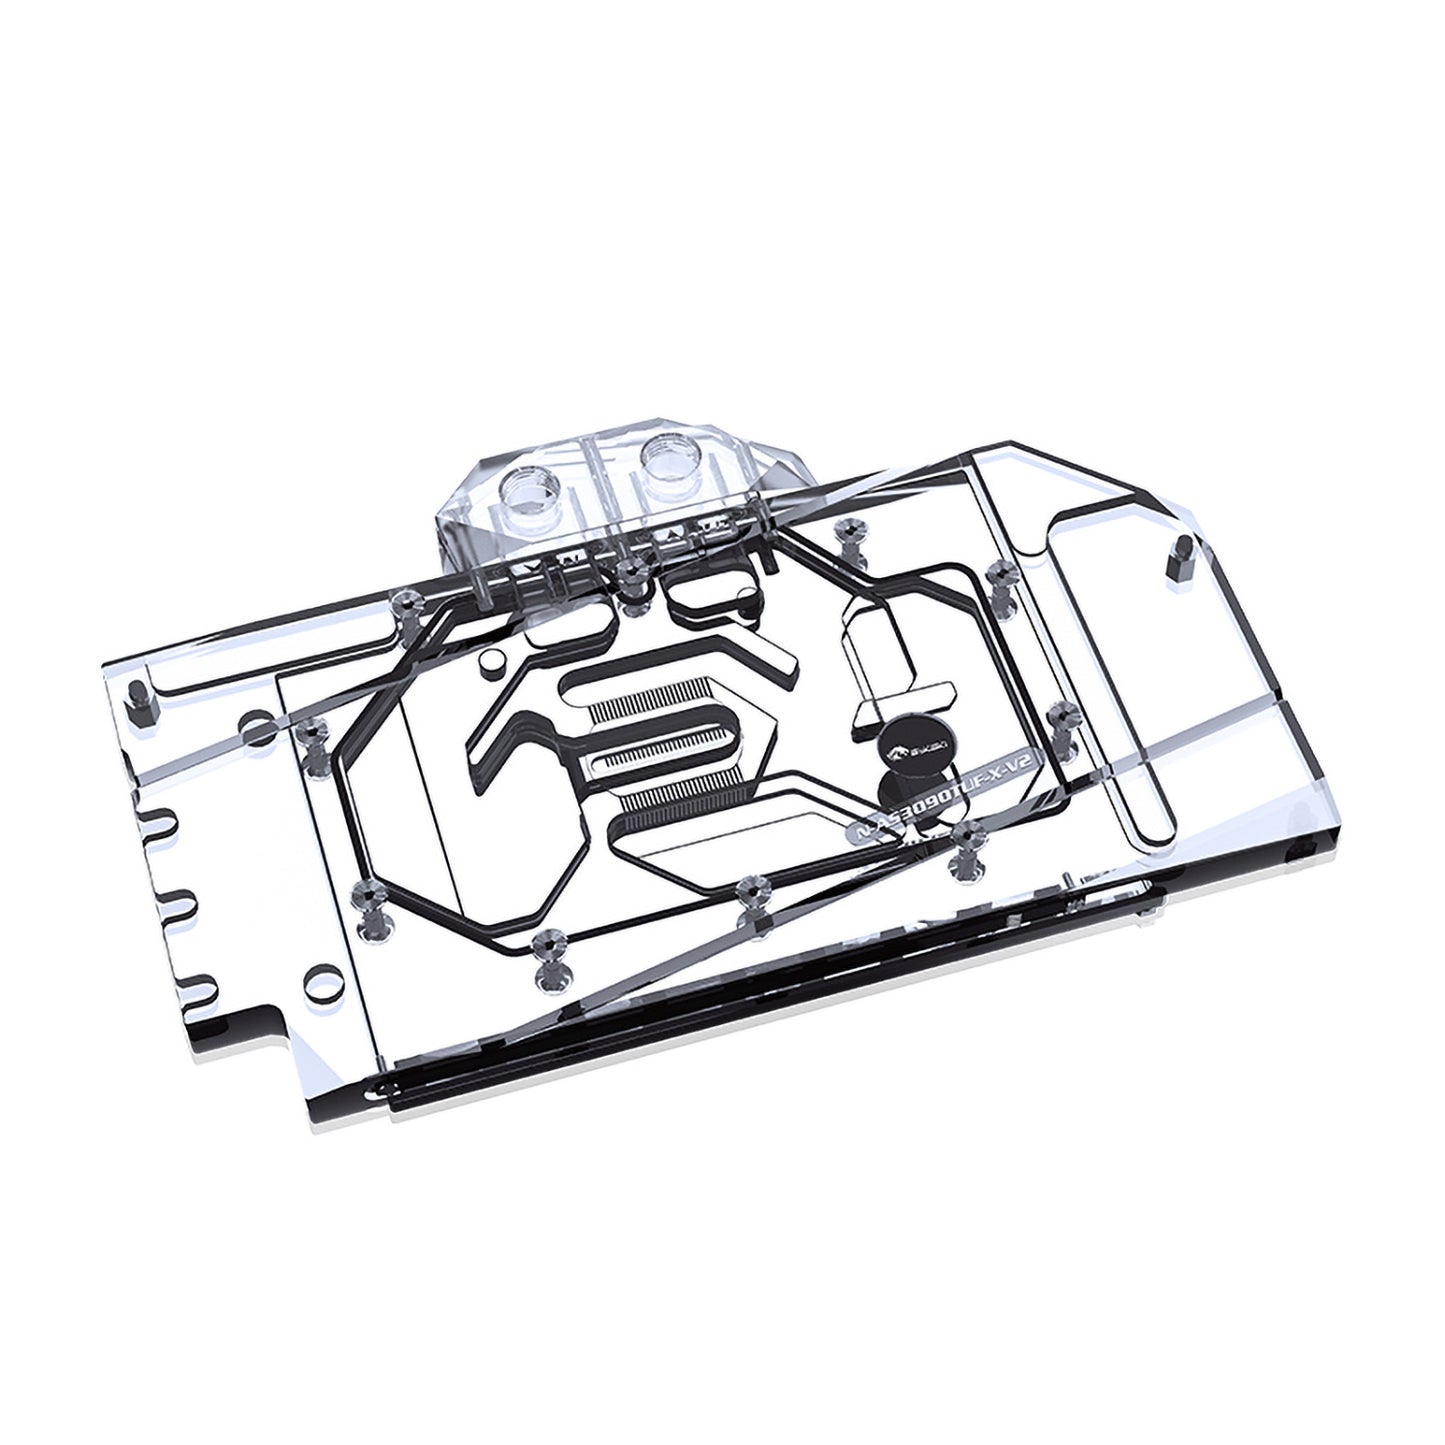 Bykski GPU Water Cooling Block For Asus TUF RTX3090 3080Ti 3080 Gaming, Full Cover With Backplate PC Water Cooling Cooler, N-AS3090TUF-X-V2